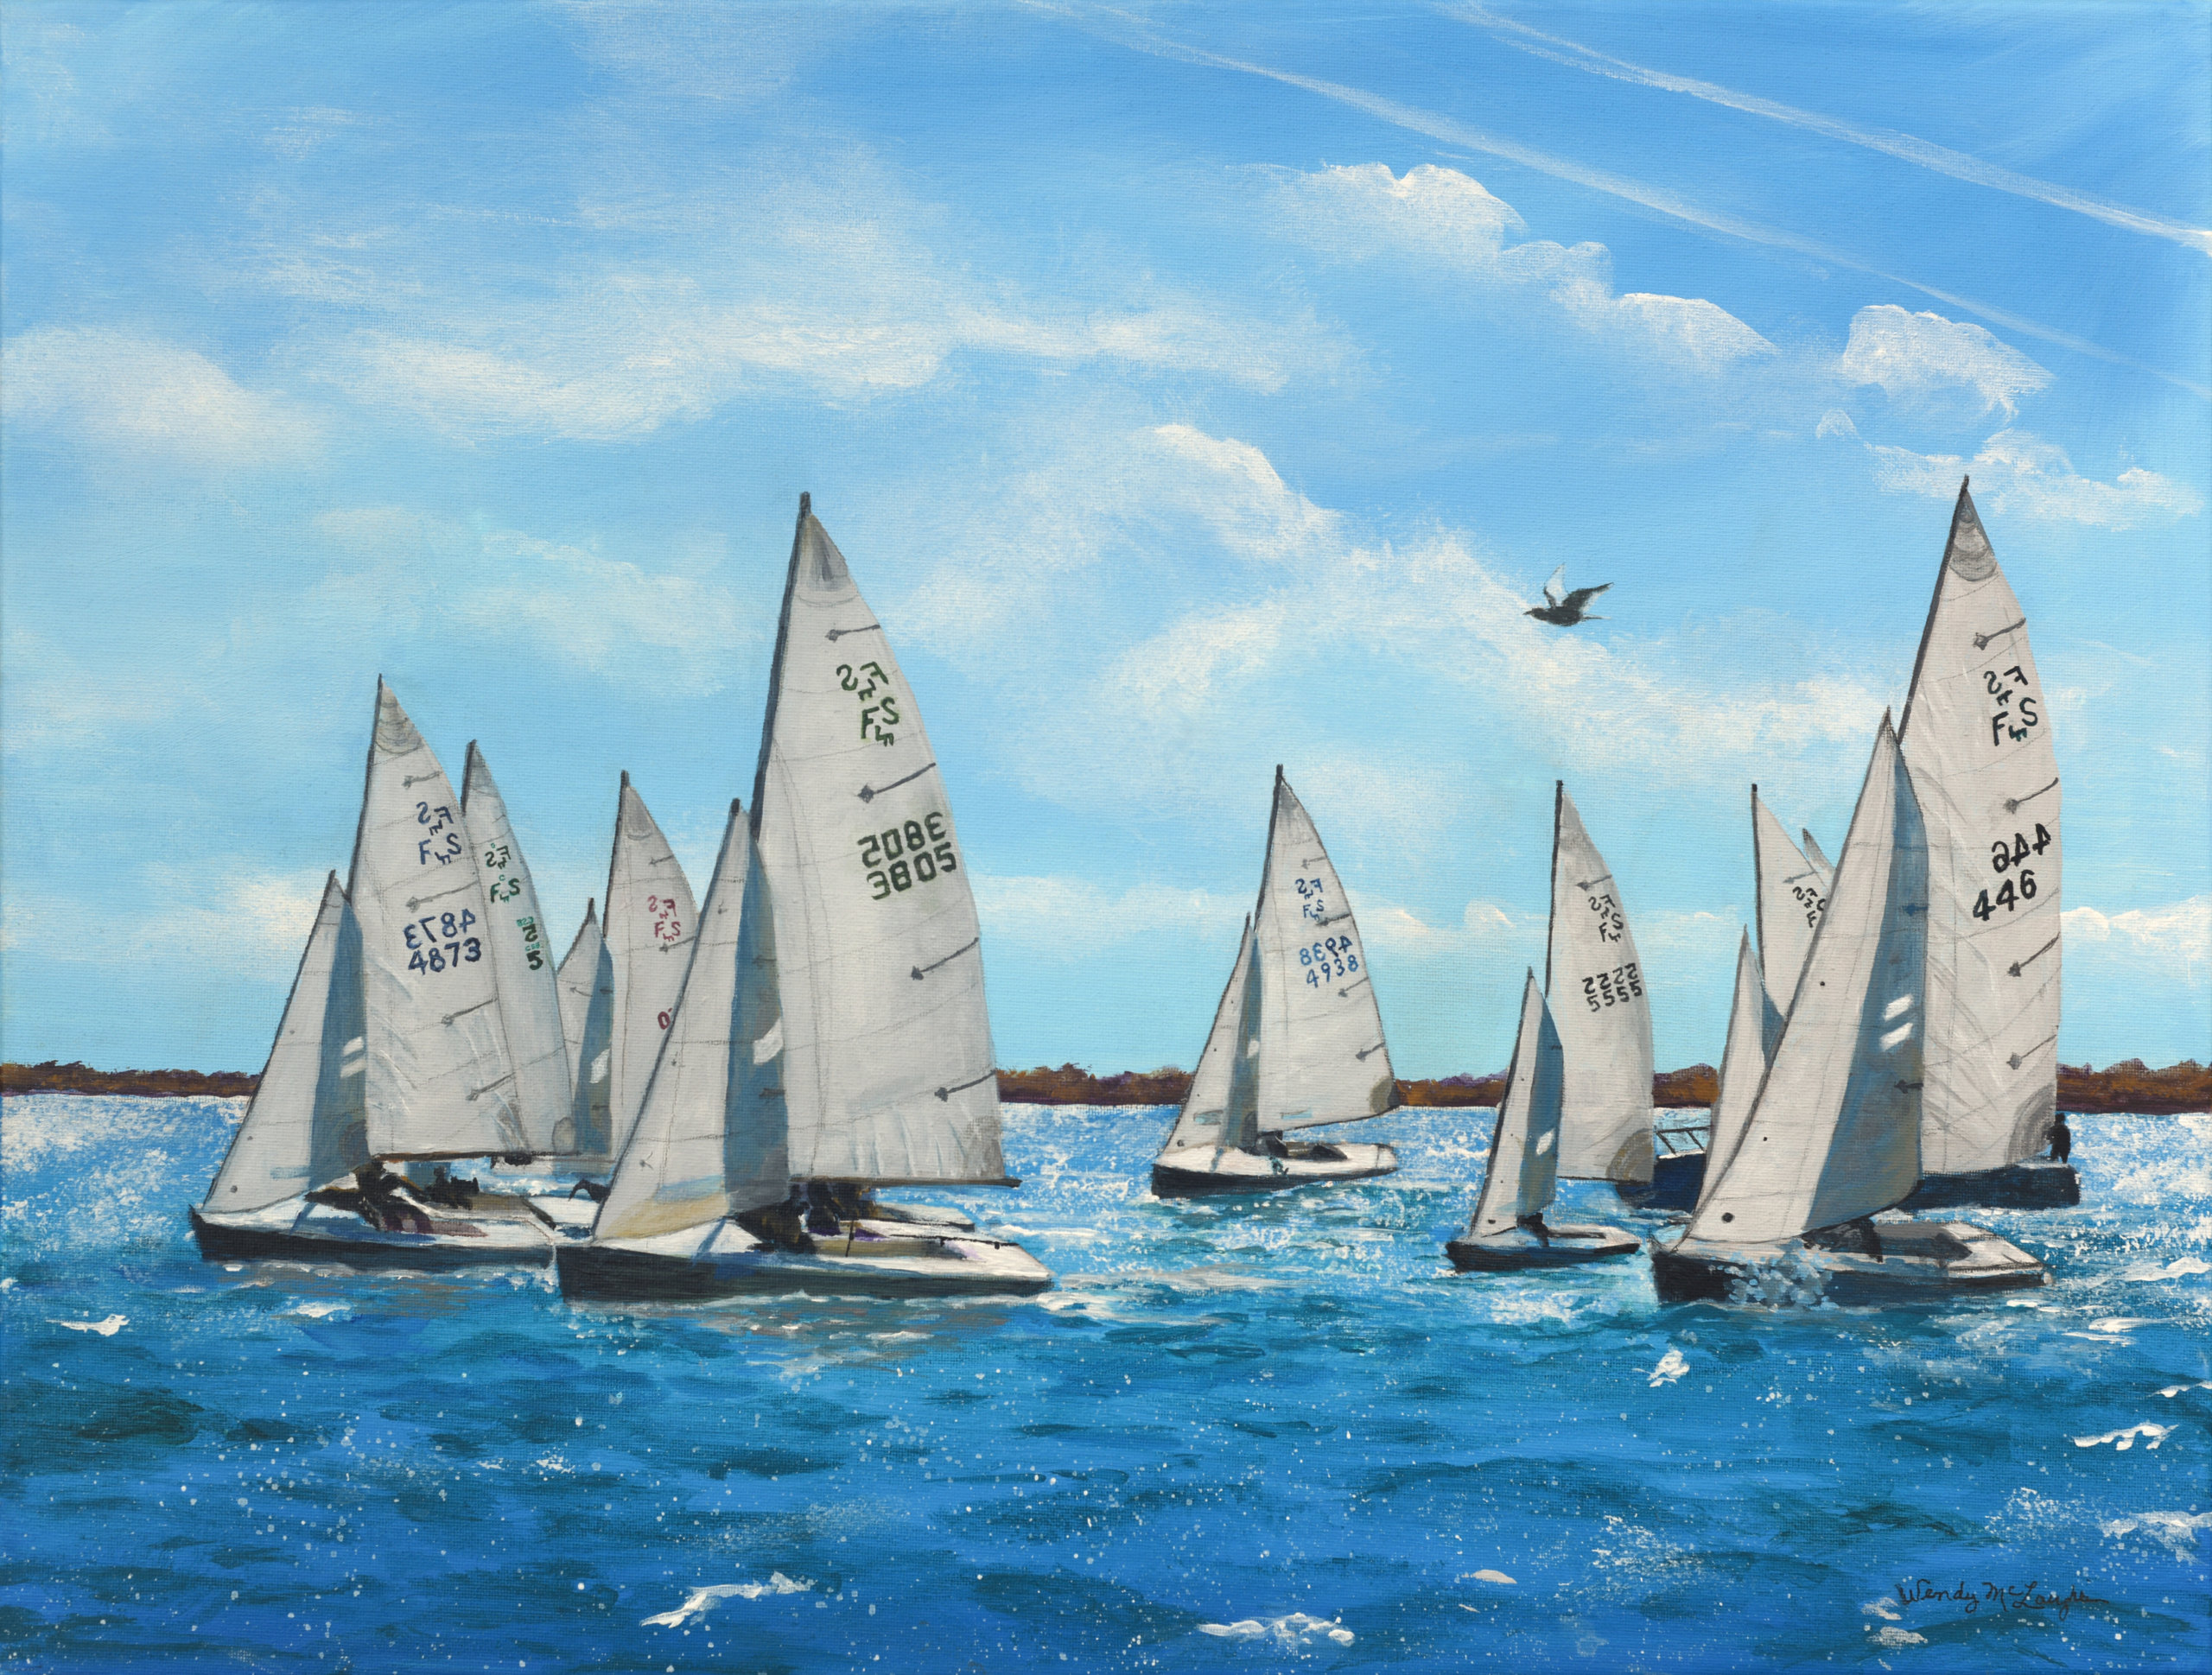 "Sailboat Race" by Wendy McLaughlin 